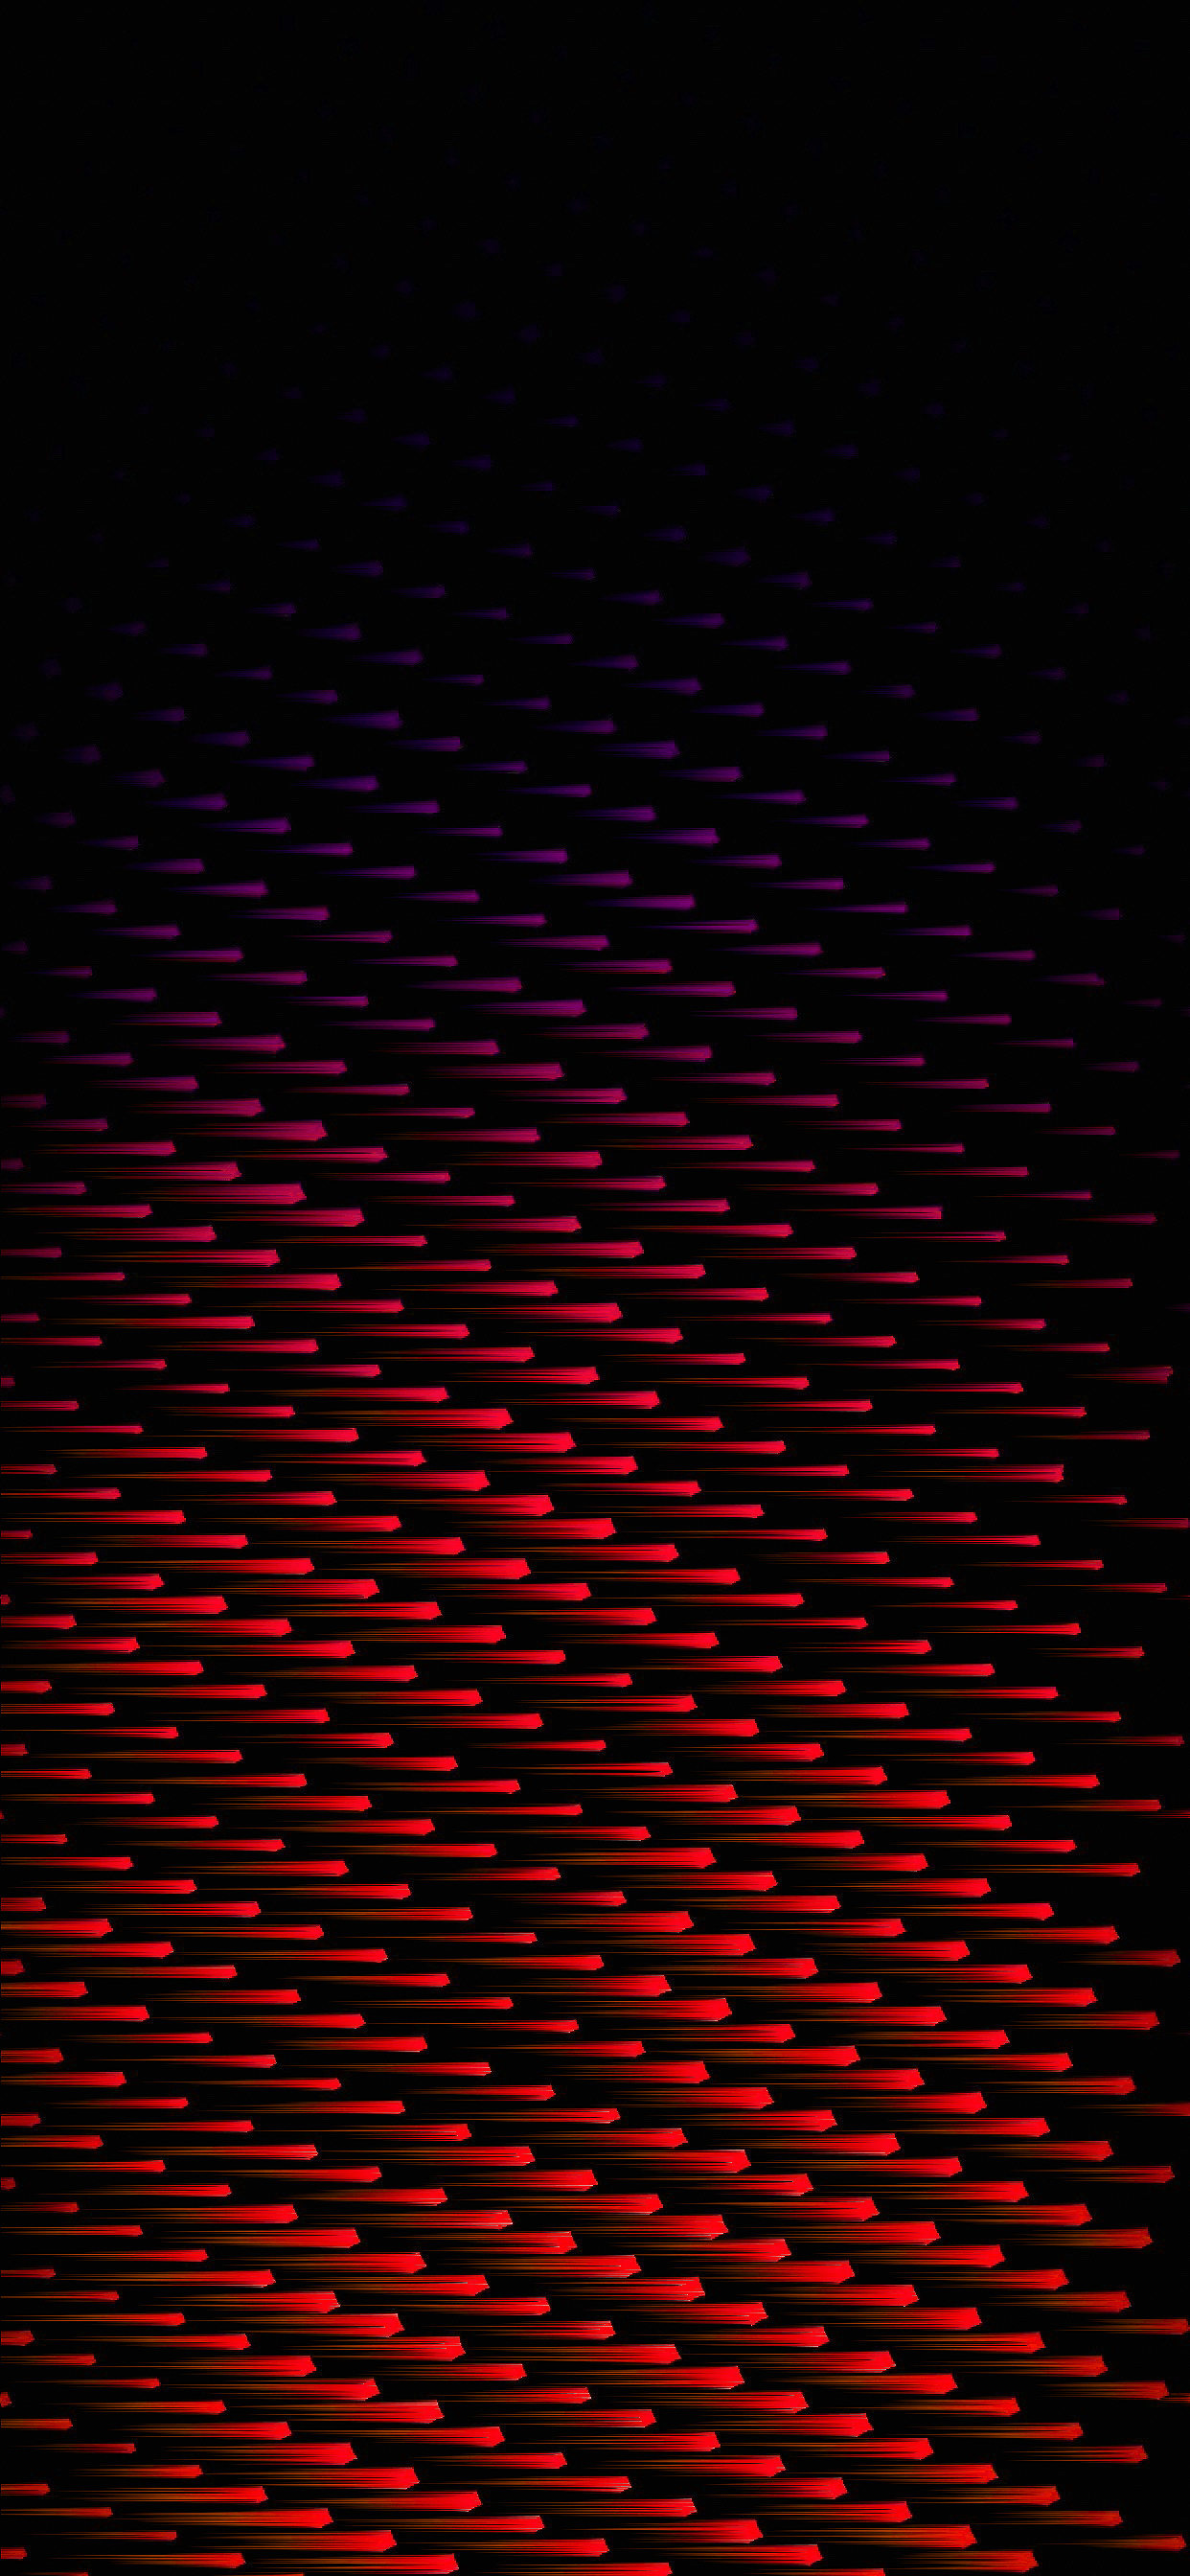 Texture Wallpaper for iPhone X, 6